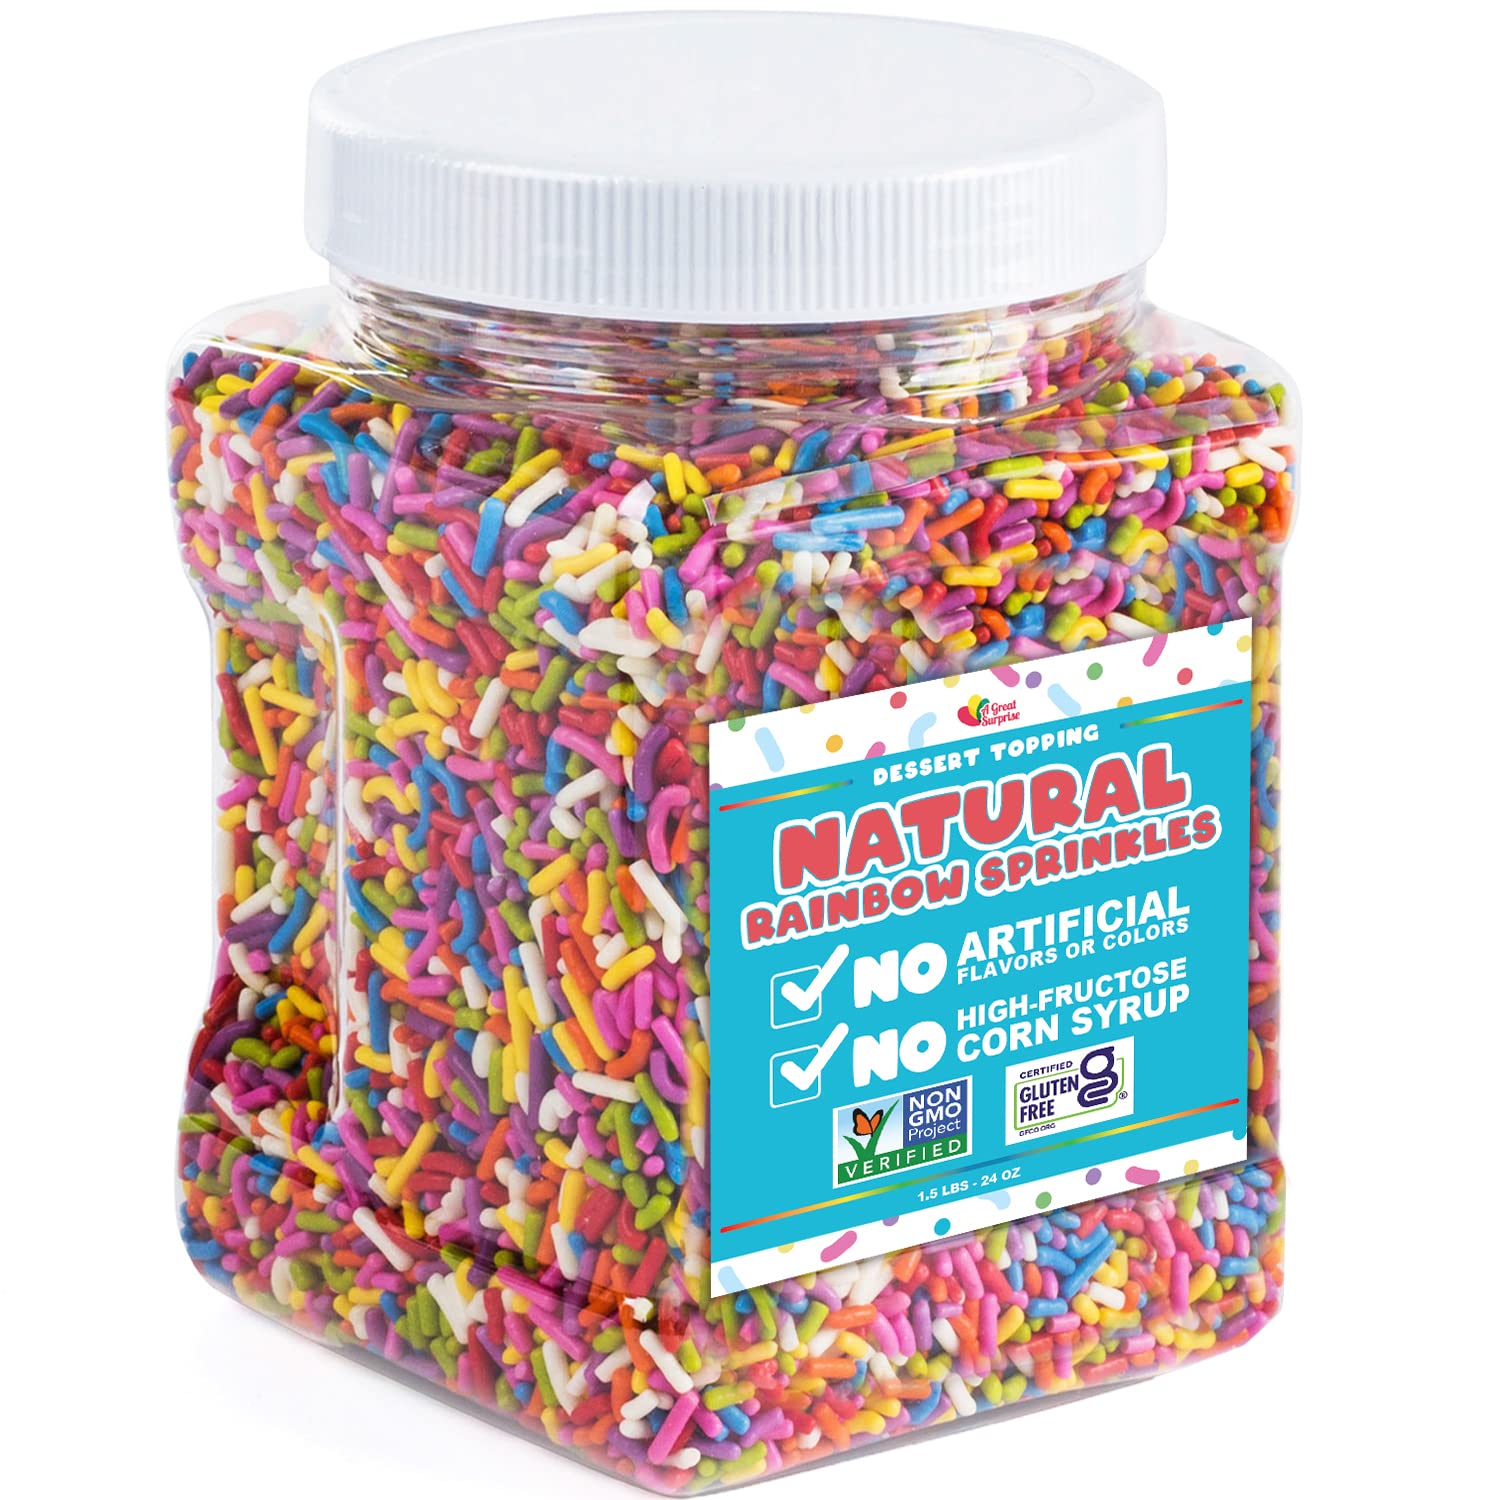 Keto Sprinkles, 6 oz. Larger Value Size, Dye Free, Non-GMO, Plant-Based,  Vegan, Gluten Free, All Natural, No Artificial Coloring, Sugar Free